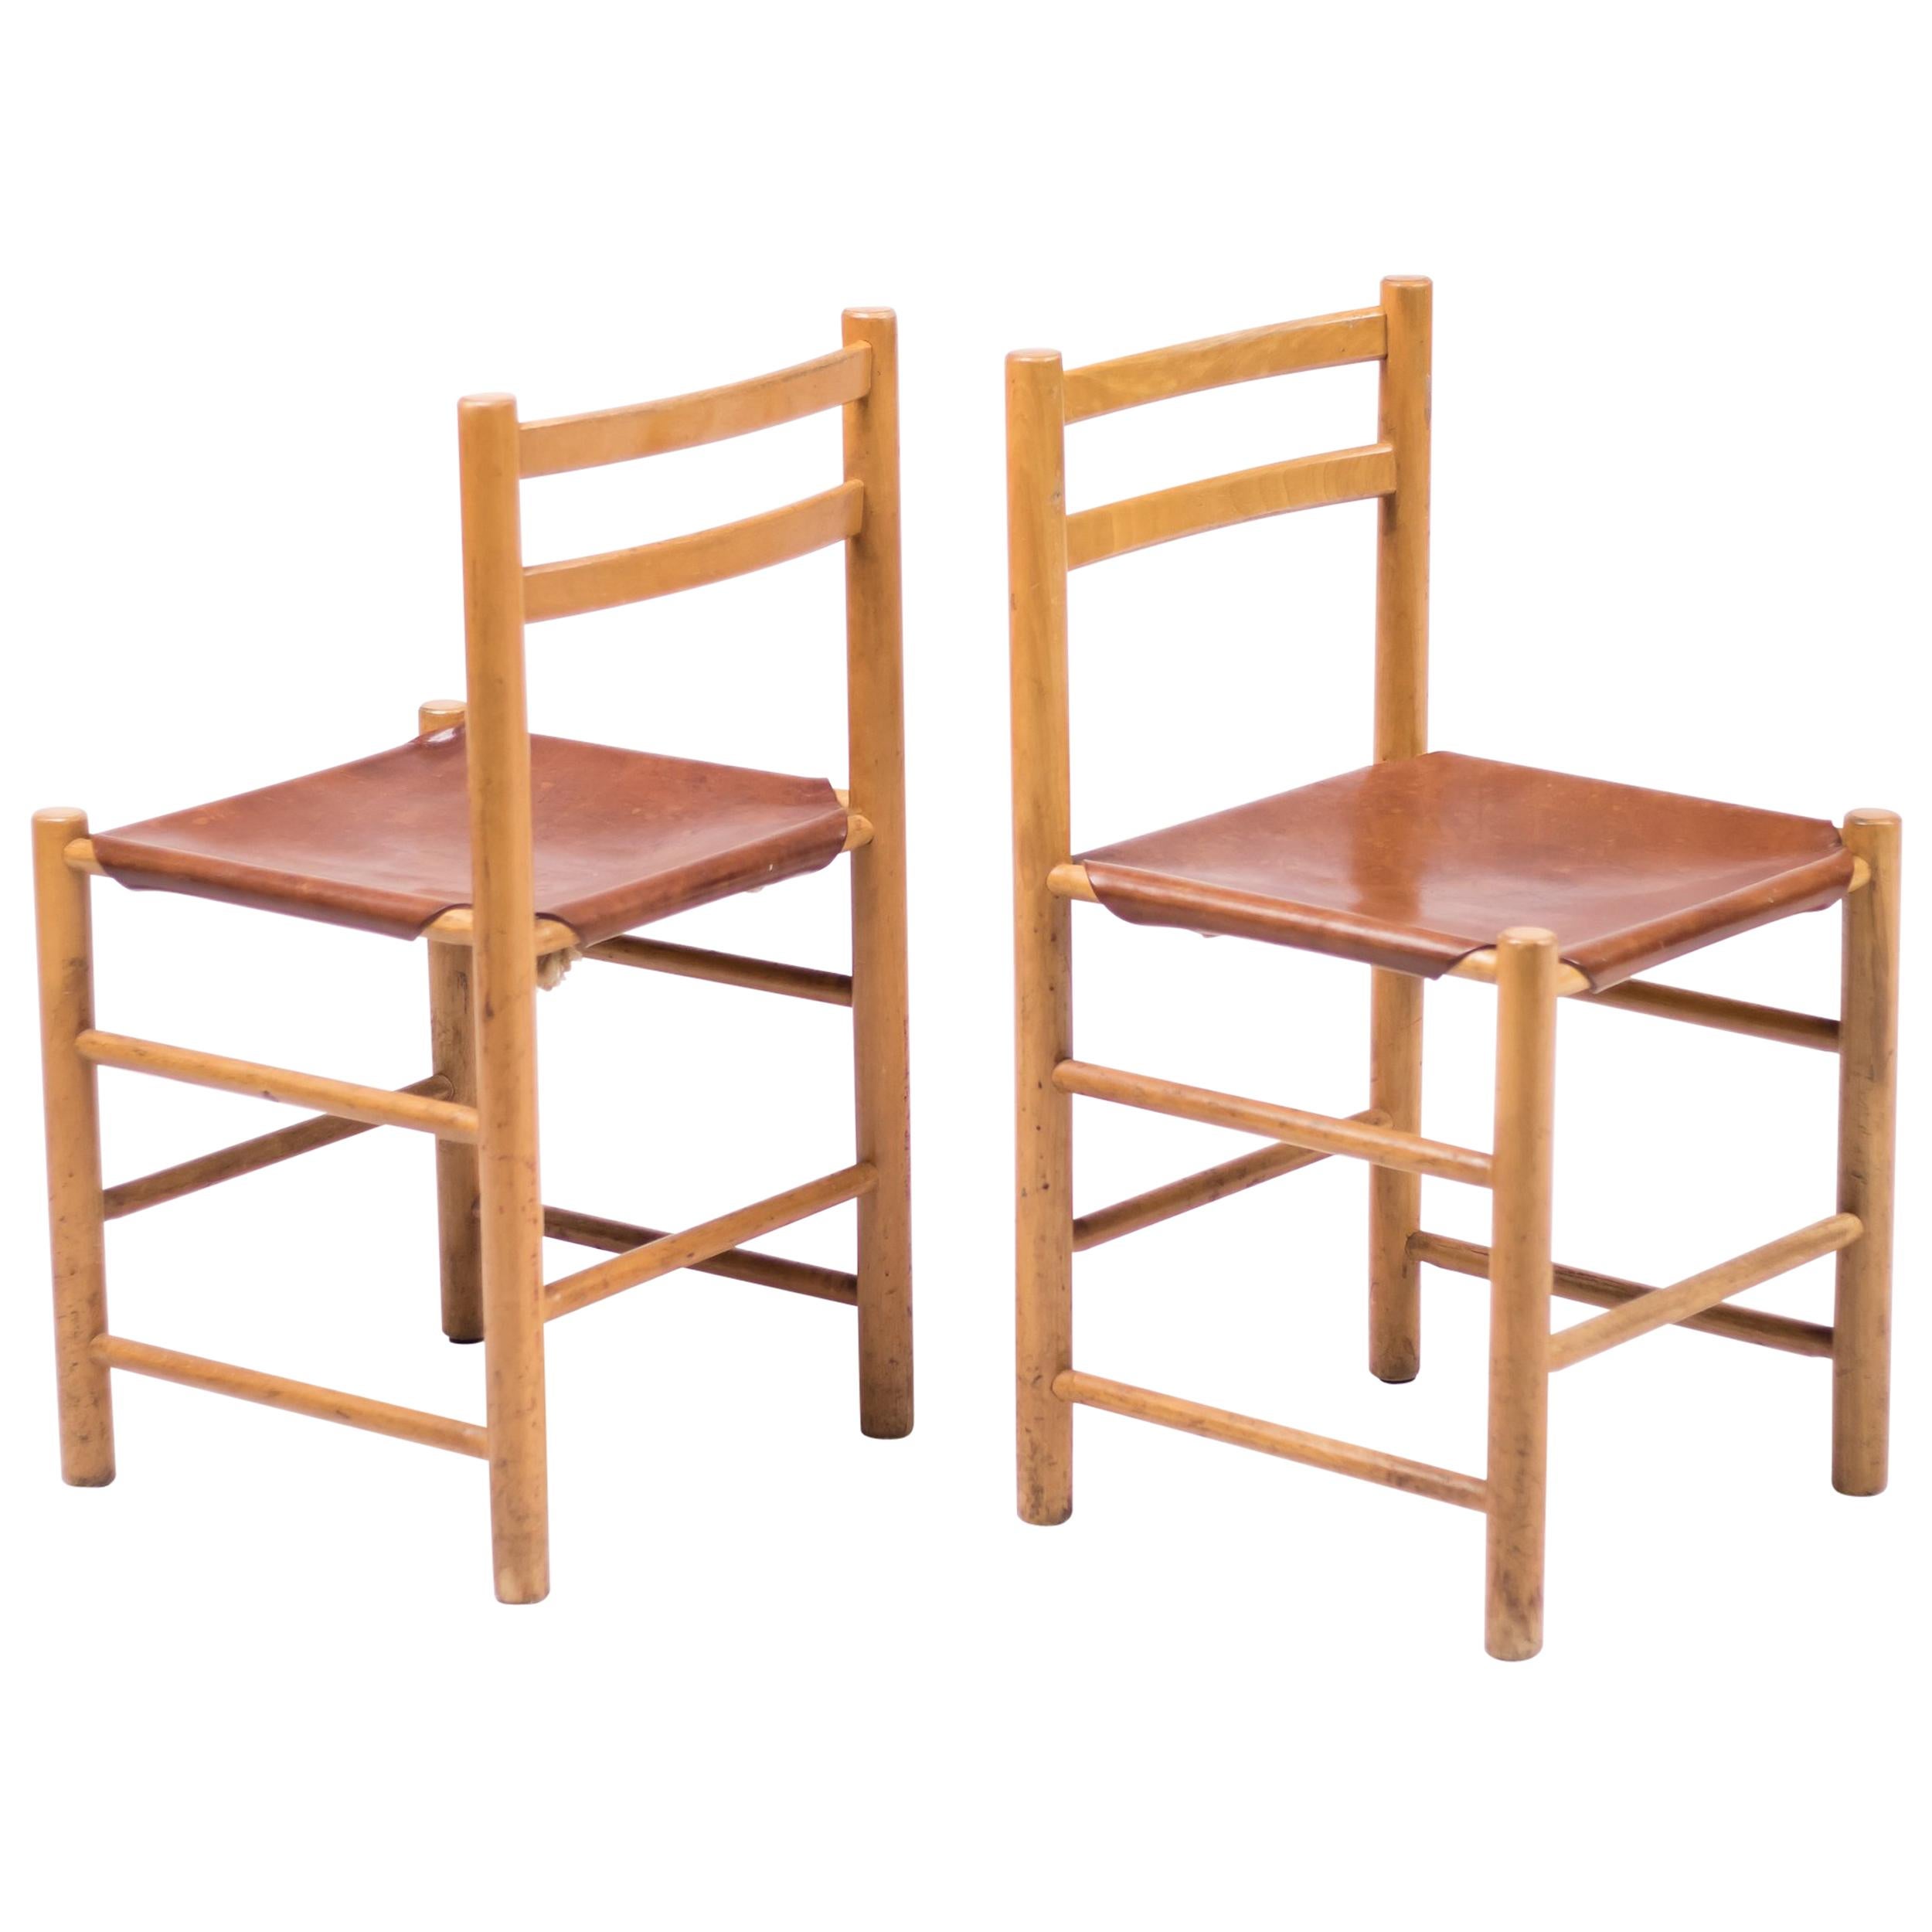 Pair of Minimalist Chairs in Maple and Saddle Leather